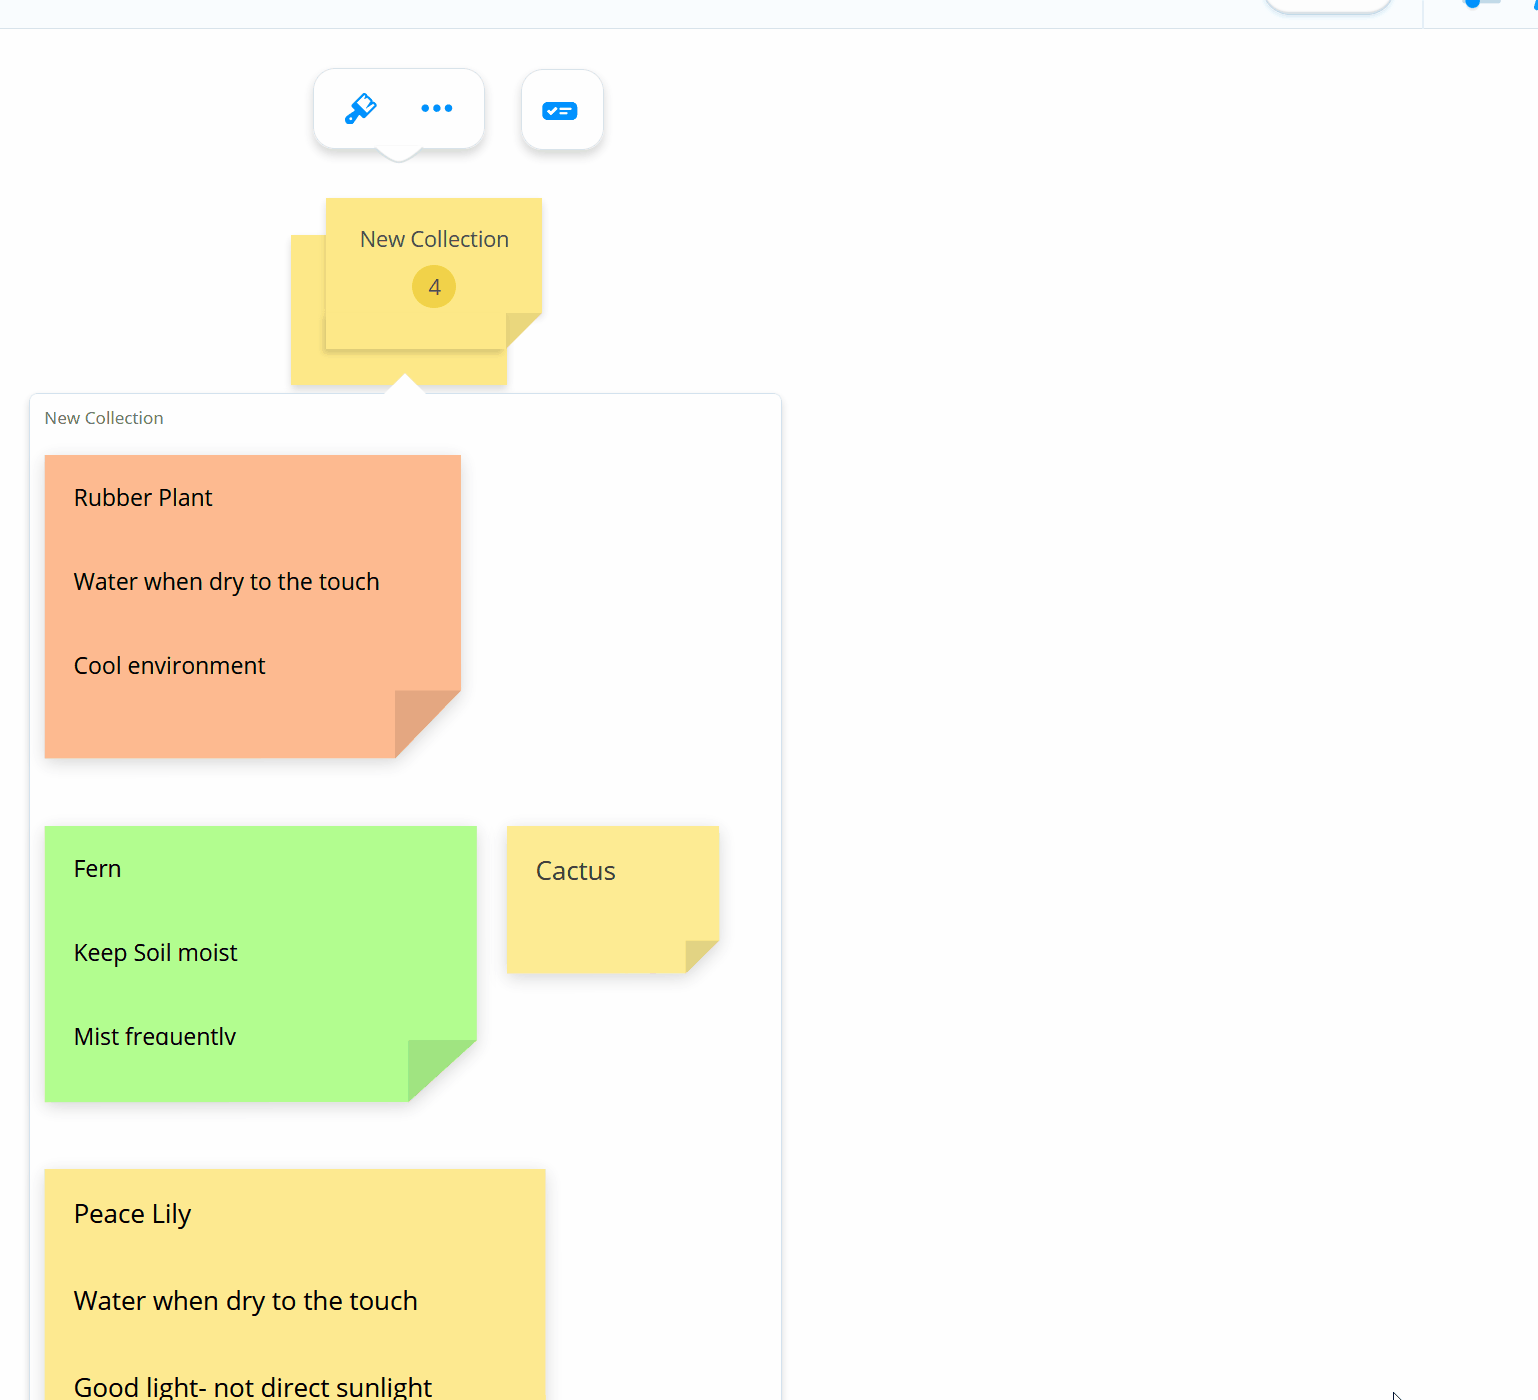 To remove notes, drag the notes out of the collection back to the whiteboard canvas